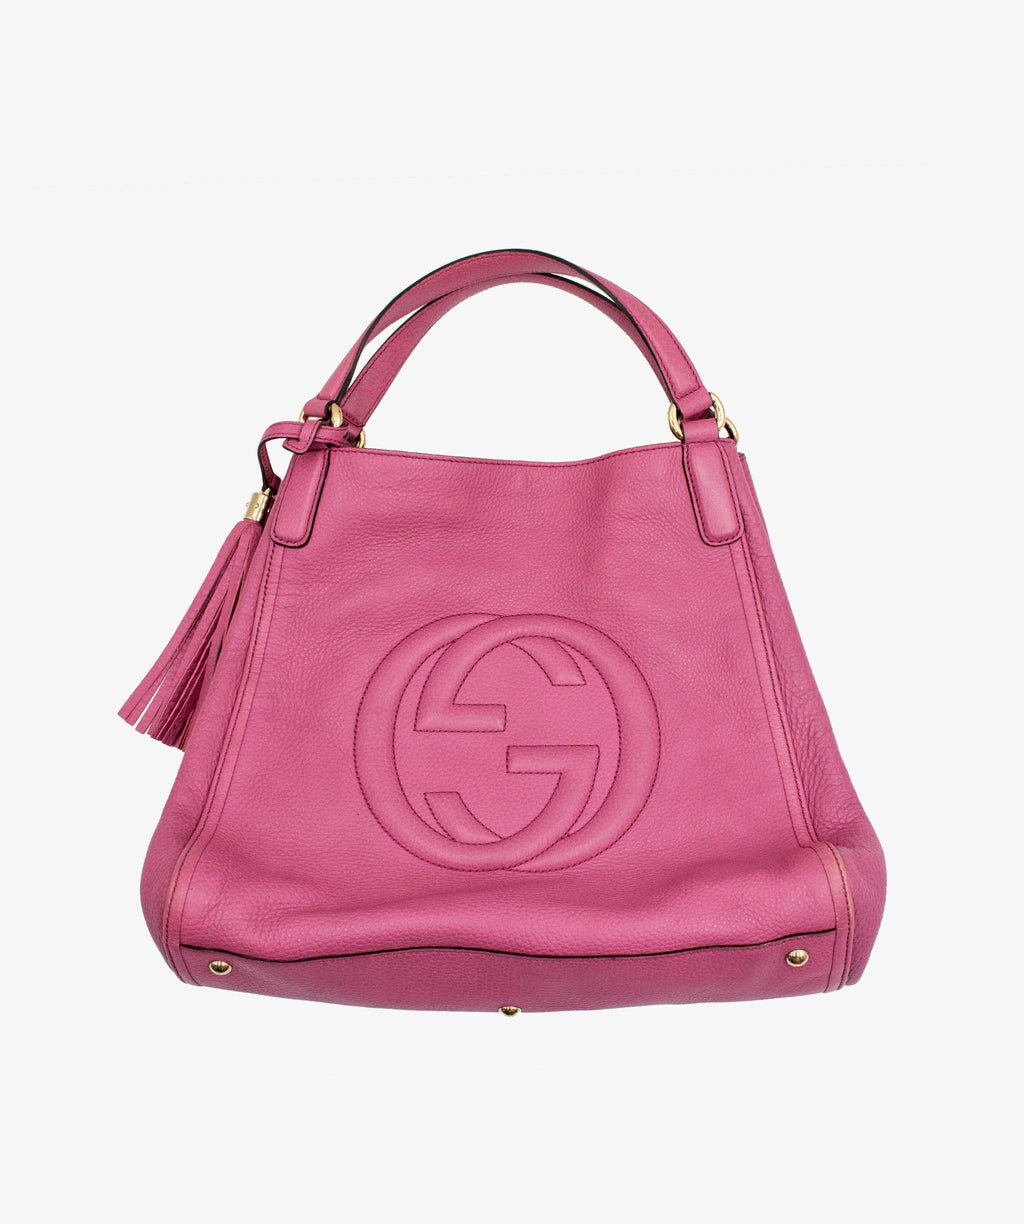 Hand - Pink - GUCCI - GG - Mini - toddler gucci kids leather sandal - Bag -  113009 – dct - Bag - Boston - Leather - Canvas - ep_vintage luxury Store